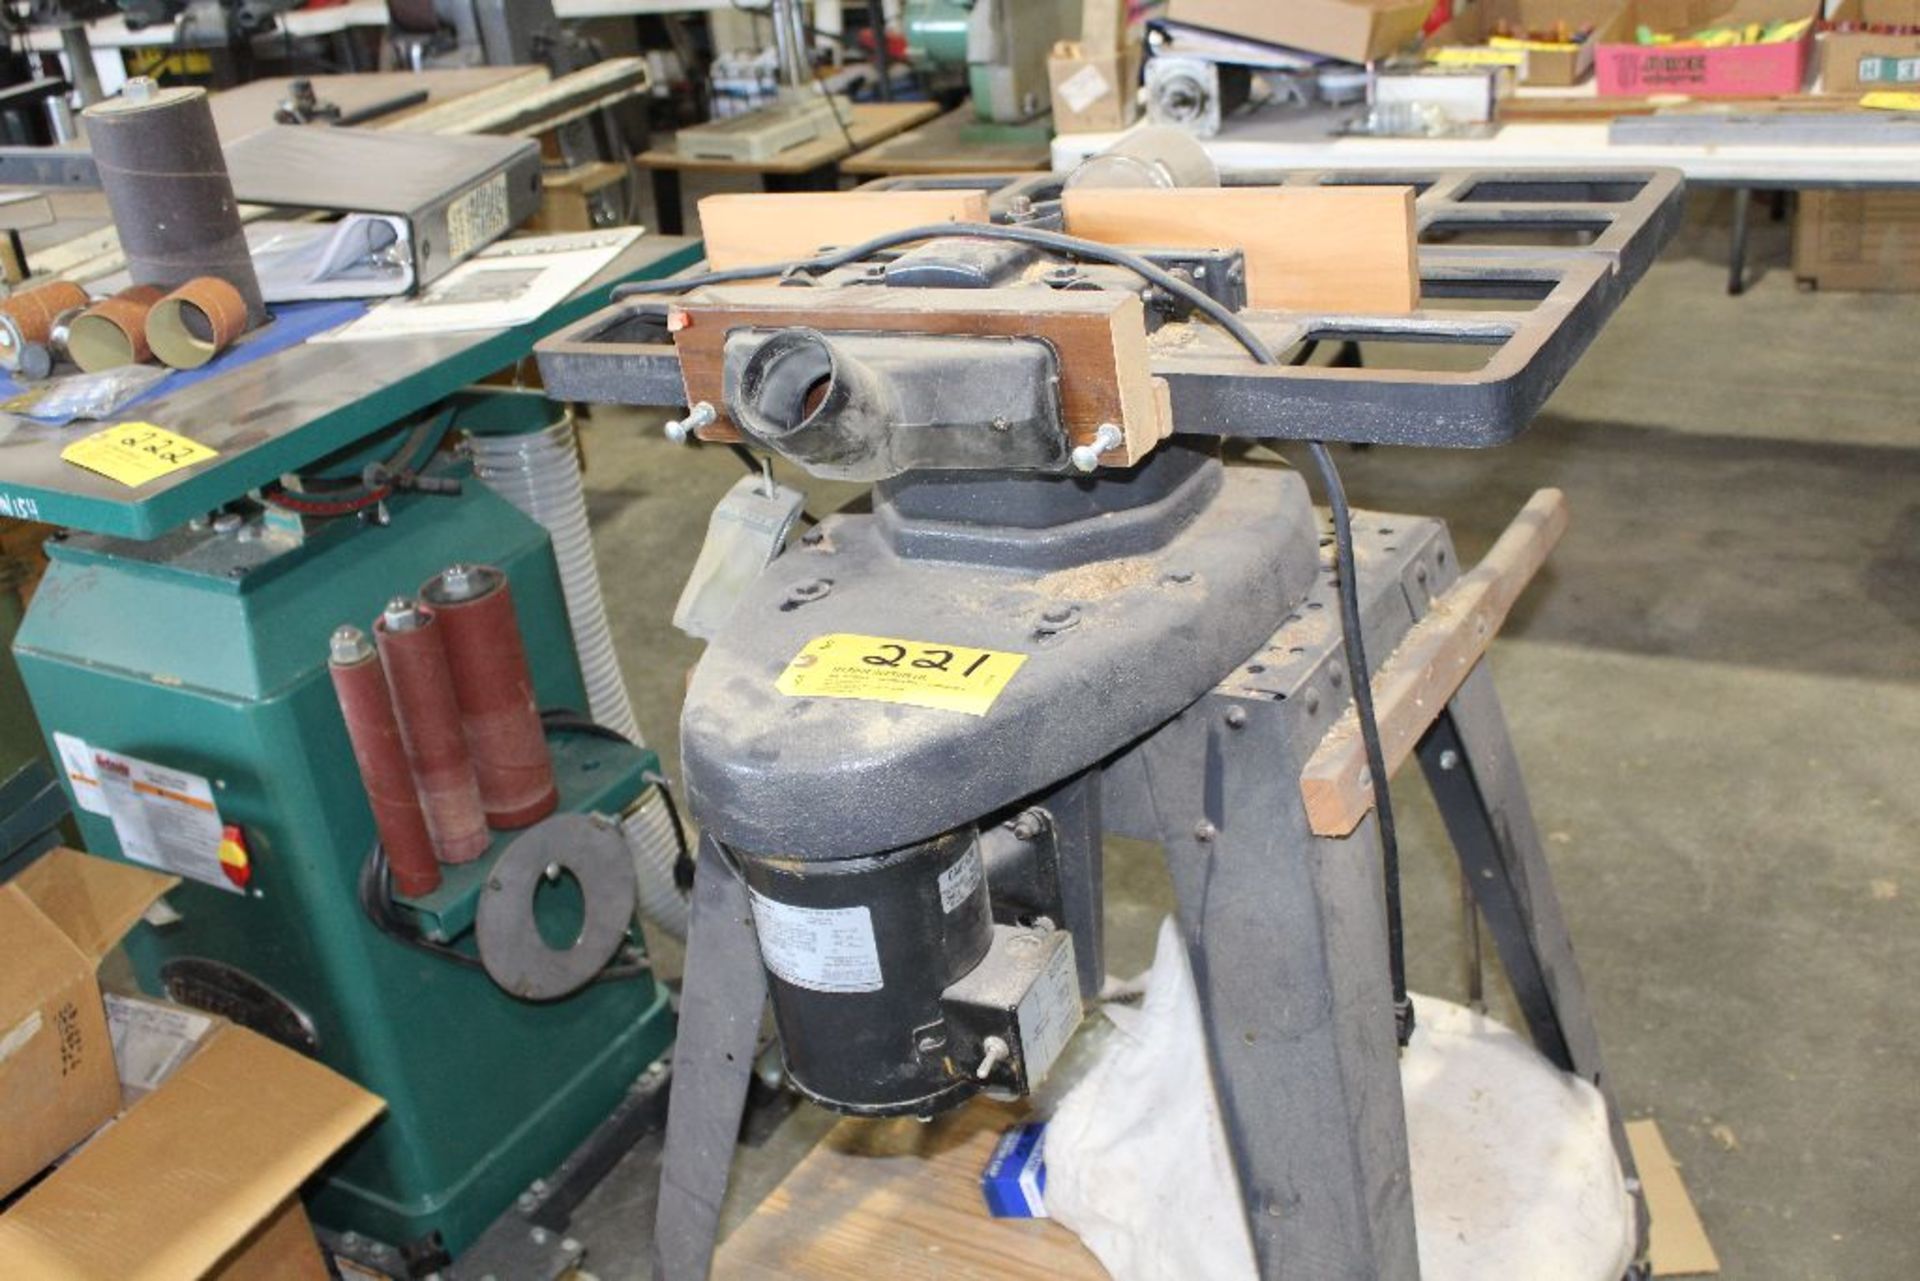 Craftsman router model 113-239390, on casters.